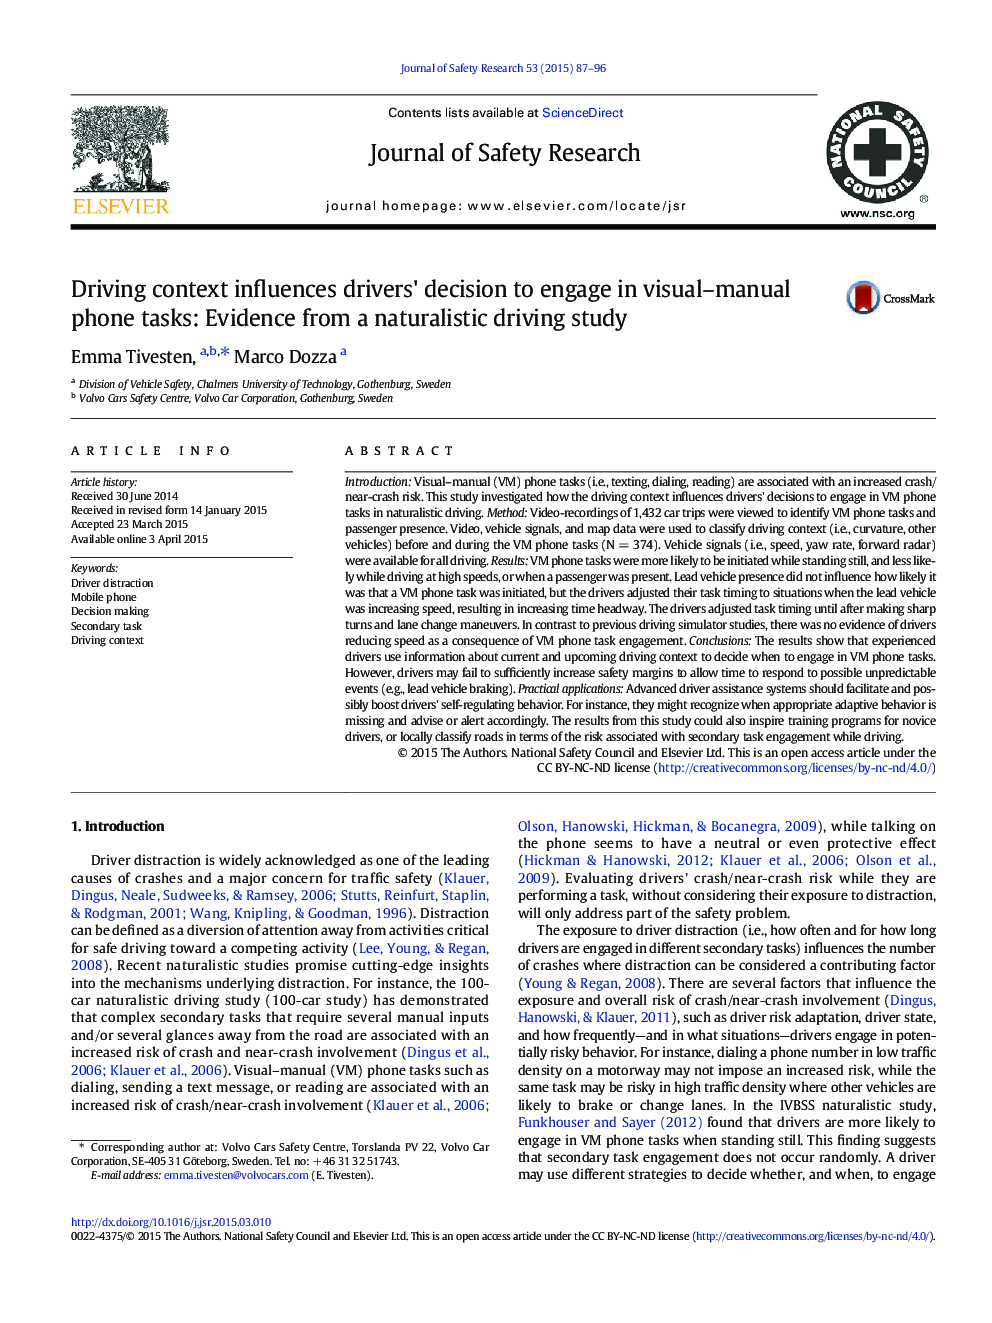 Driving context influences drivers' decision to engage in visual-manual phone tasks: Evidence from a naturalistic driving study